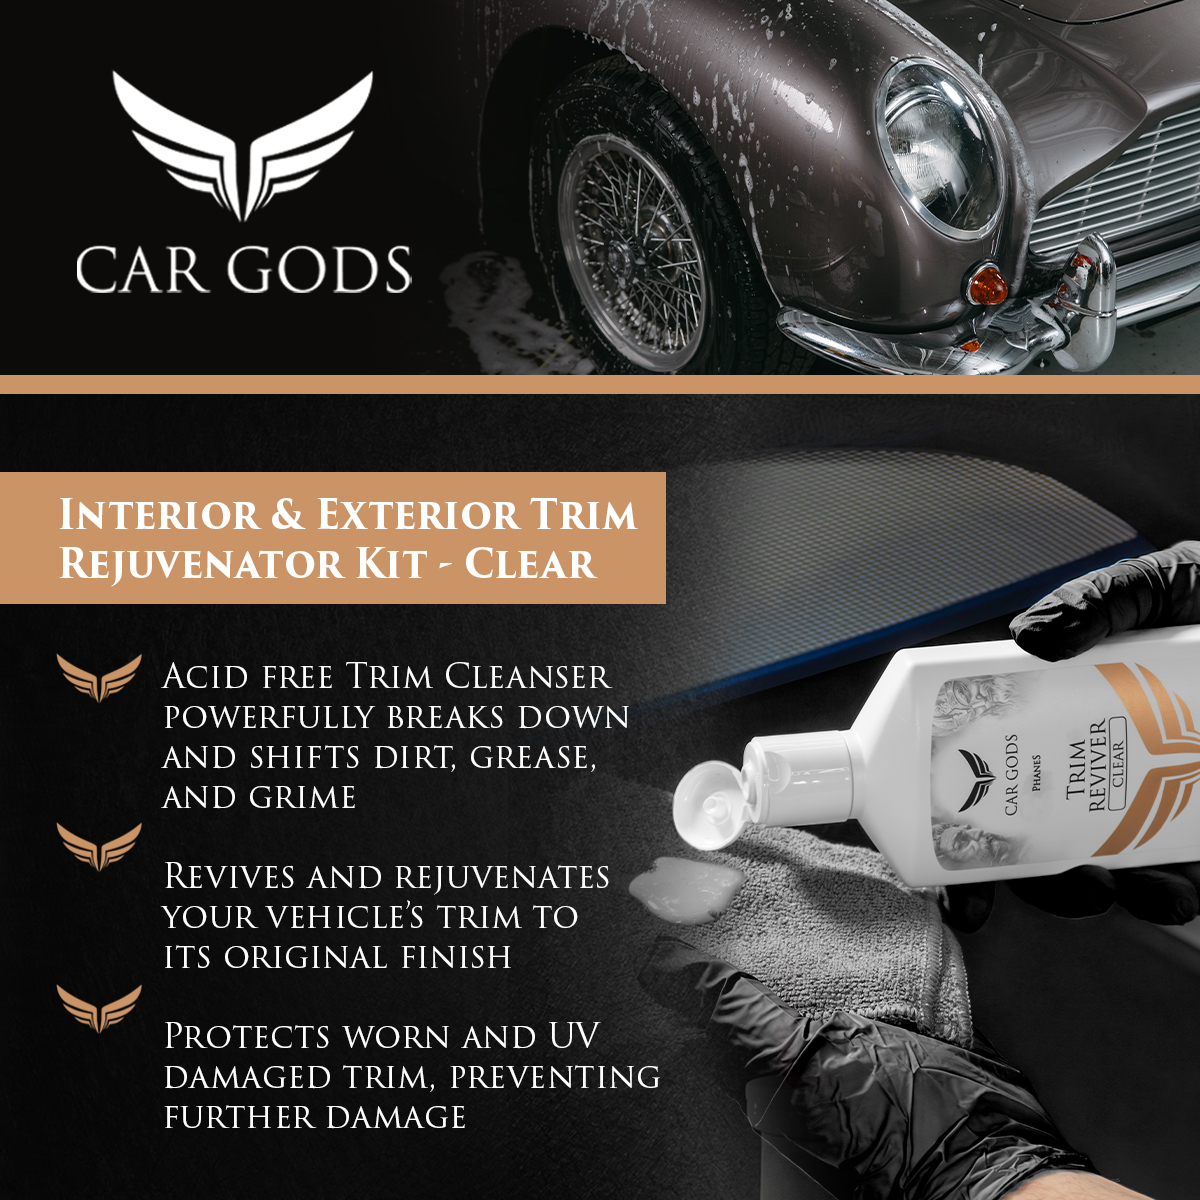 Car Gods Clear Trim Reviver Kit. Acid-free Trim Cleanser designed to powerfully breaks down and shifts dirt, grease and grime, reviving your vehicle’s trim to the original finish. The Trim reviver is designed to protect worn and UV damaged trim.